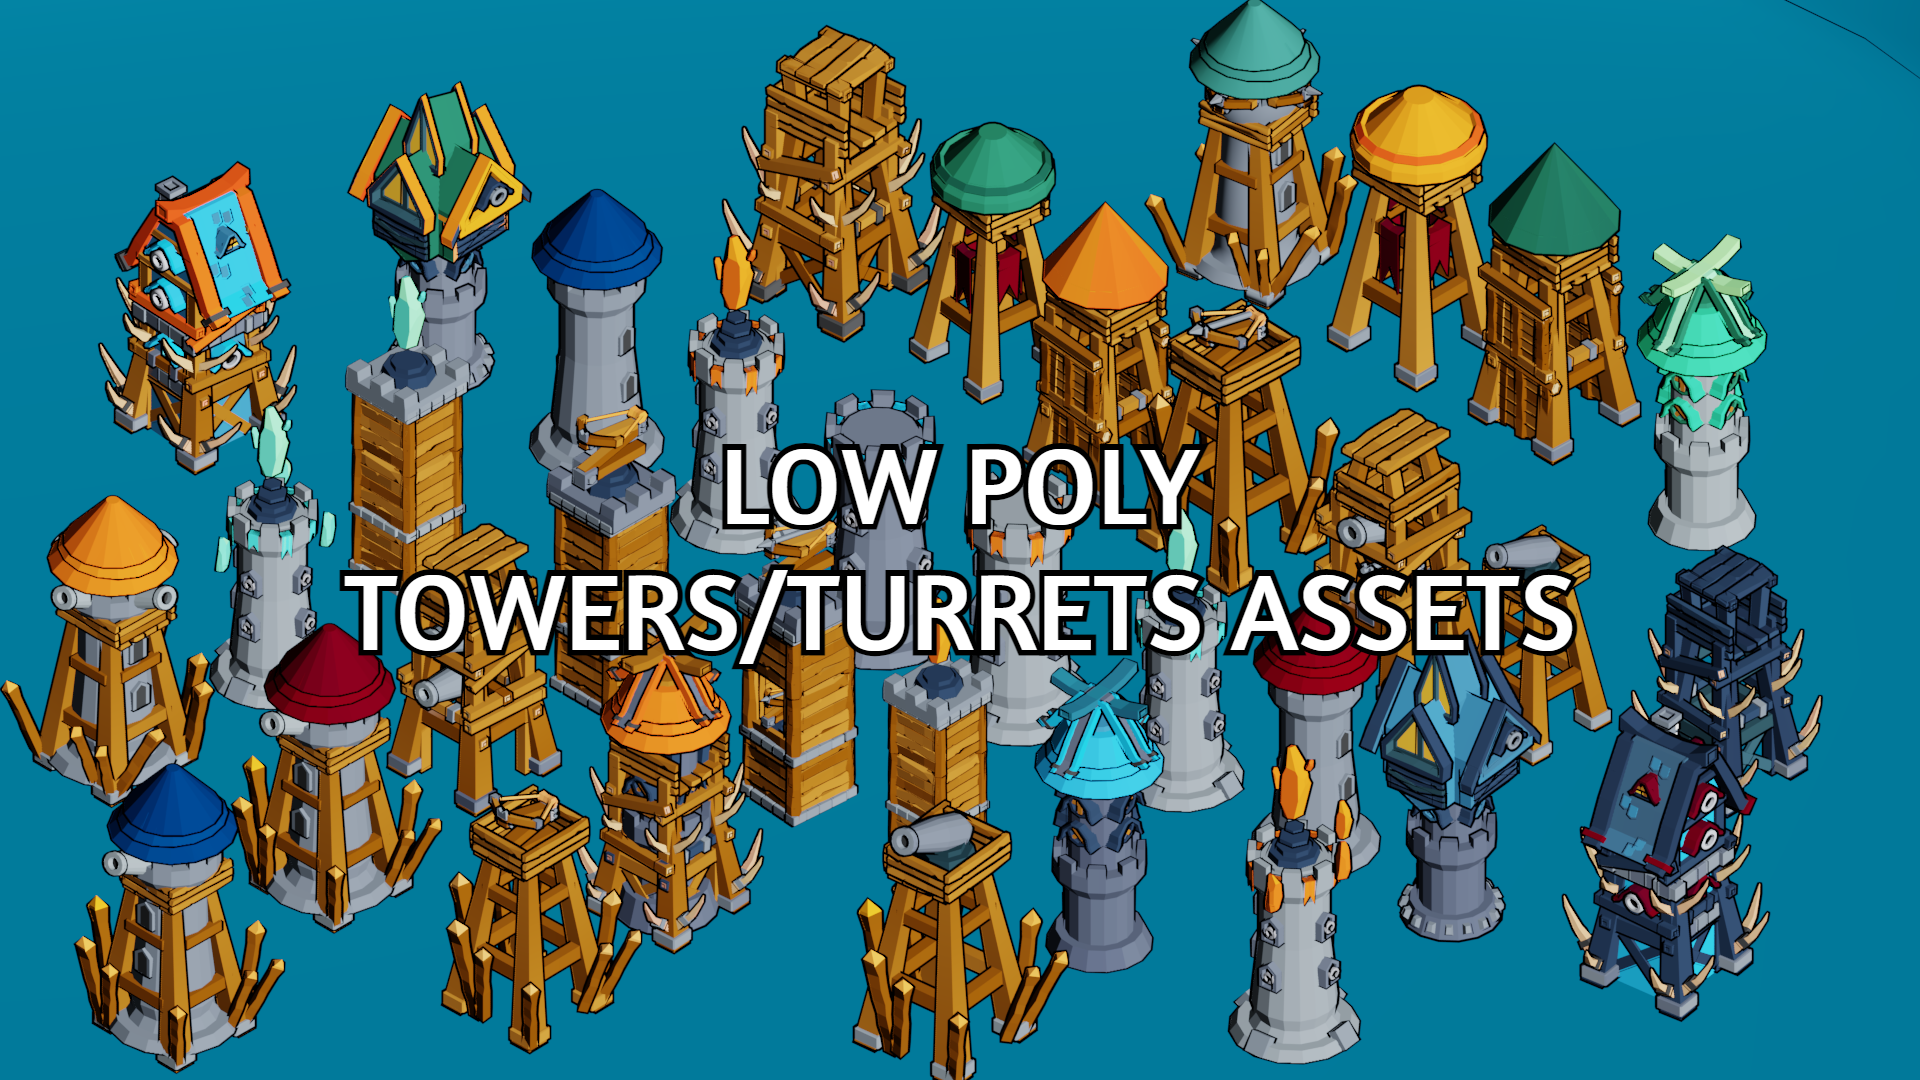 Low Poly Towers/Turrets Asset Pack